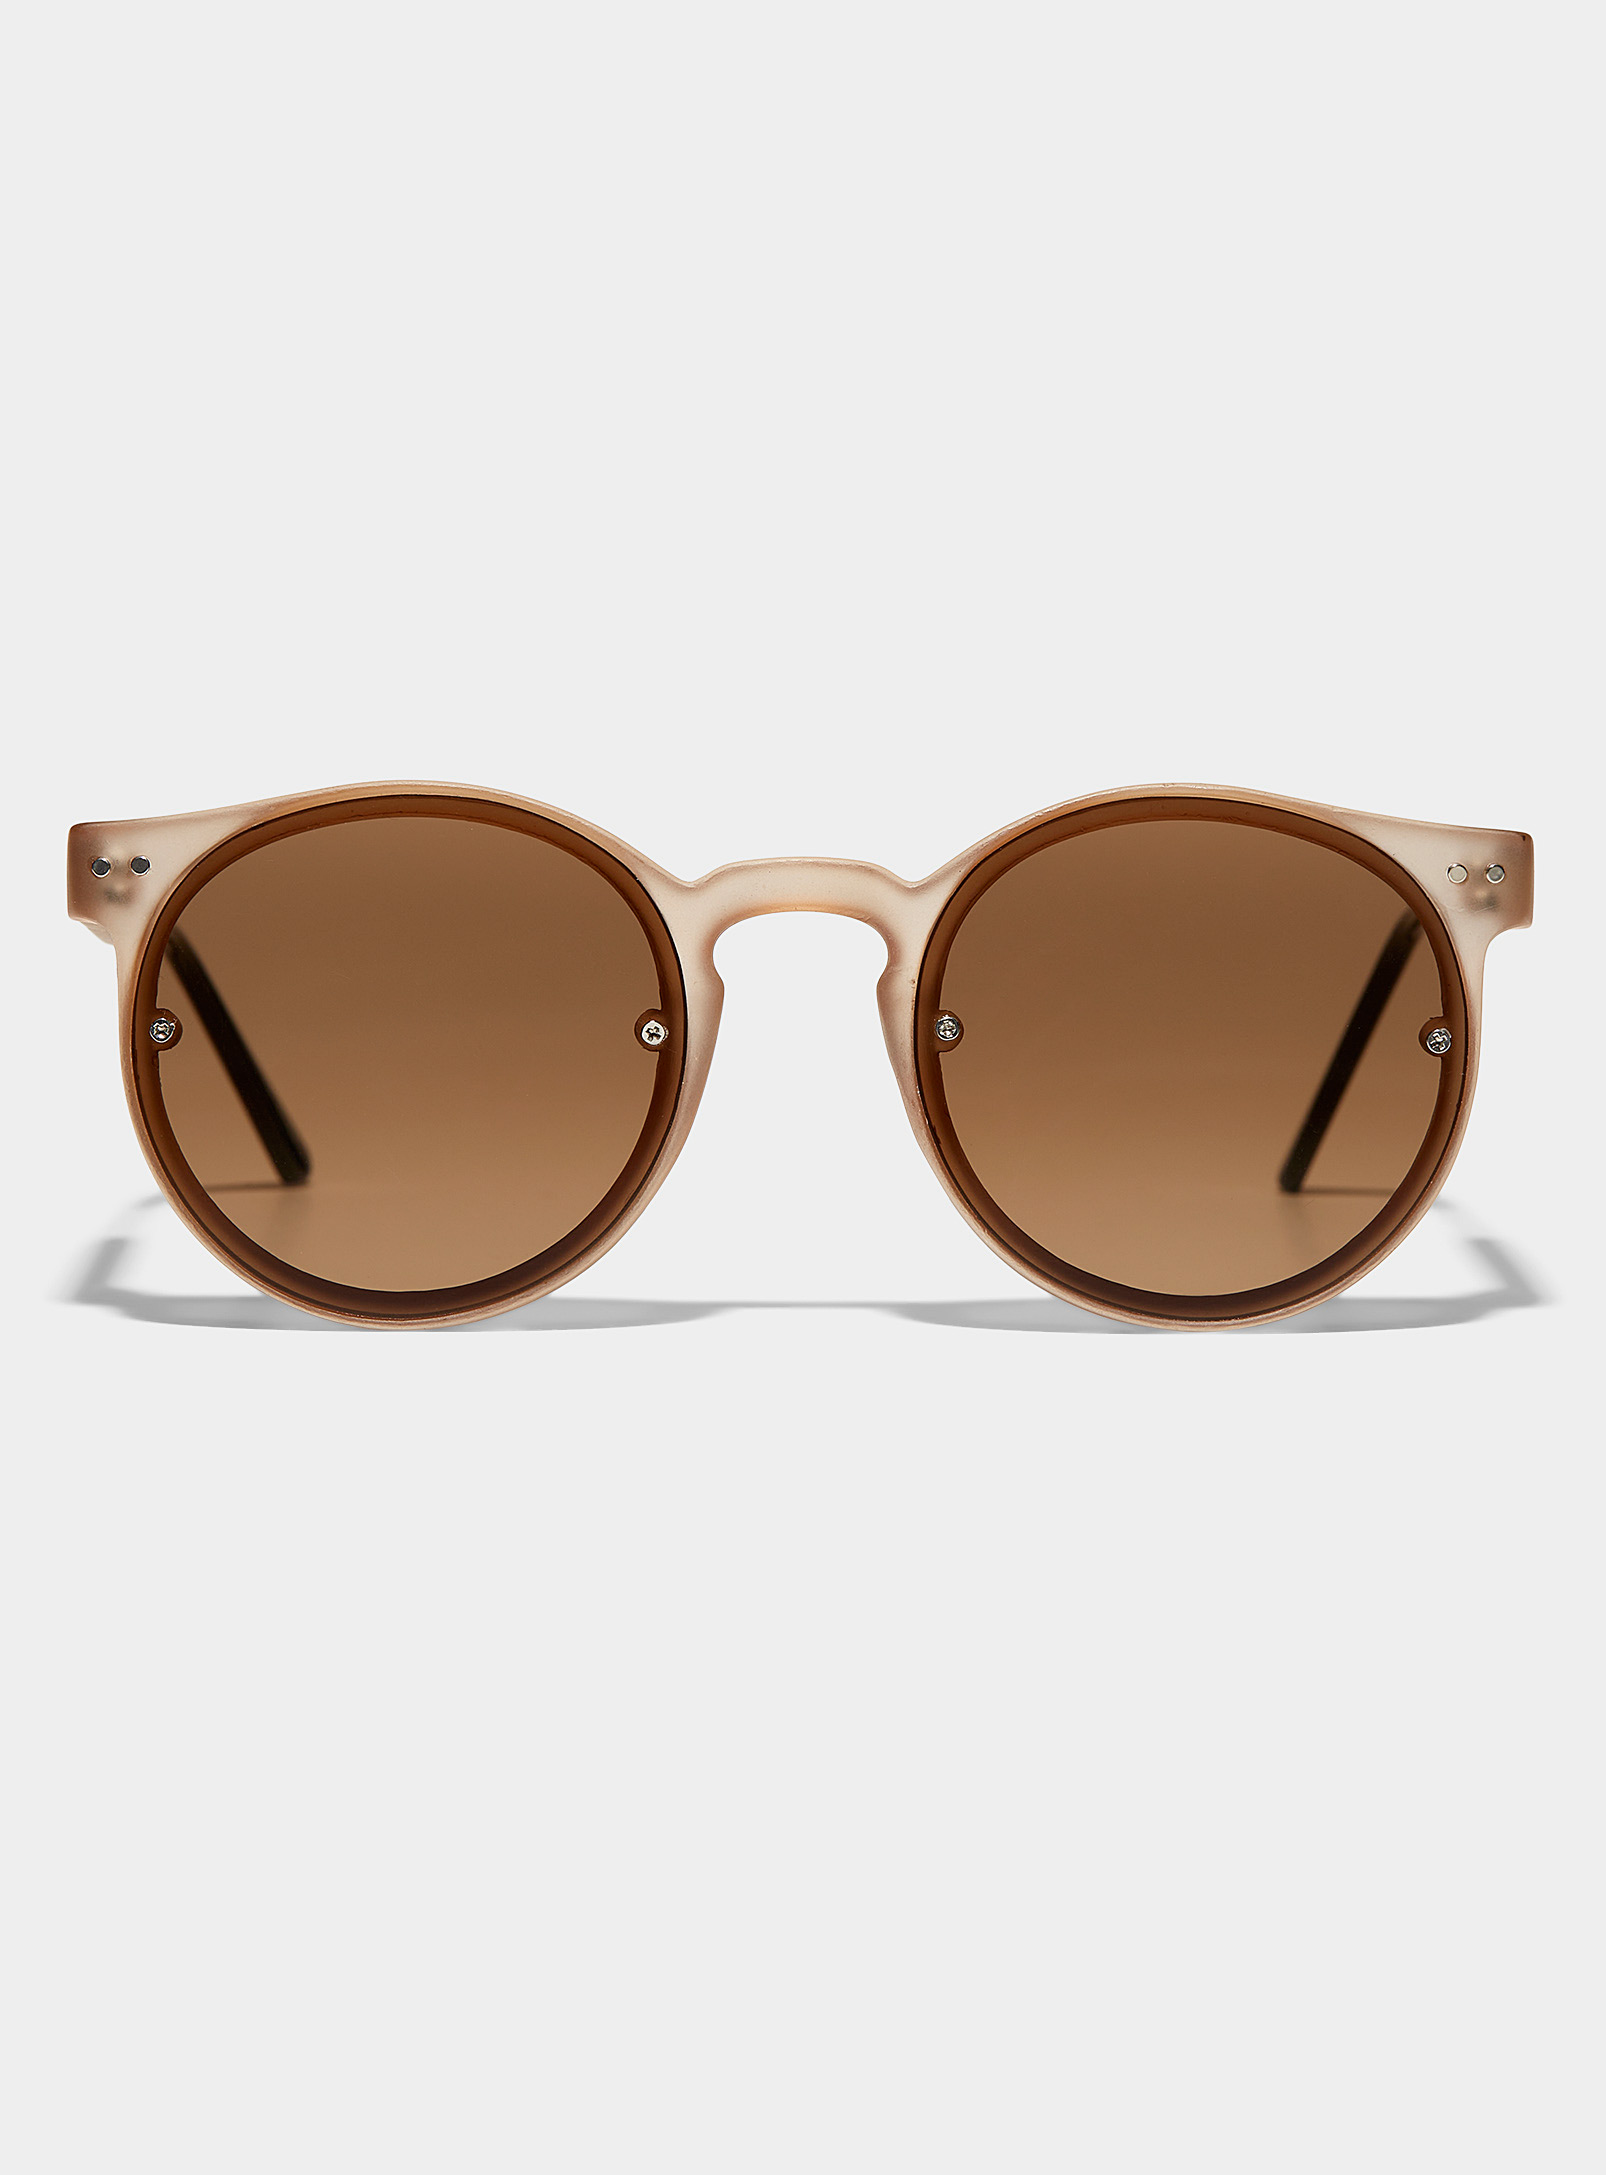 Spitfire Post Punk Round Sunglasses In Brown